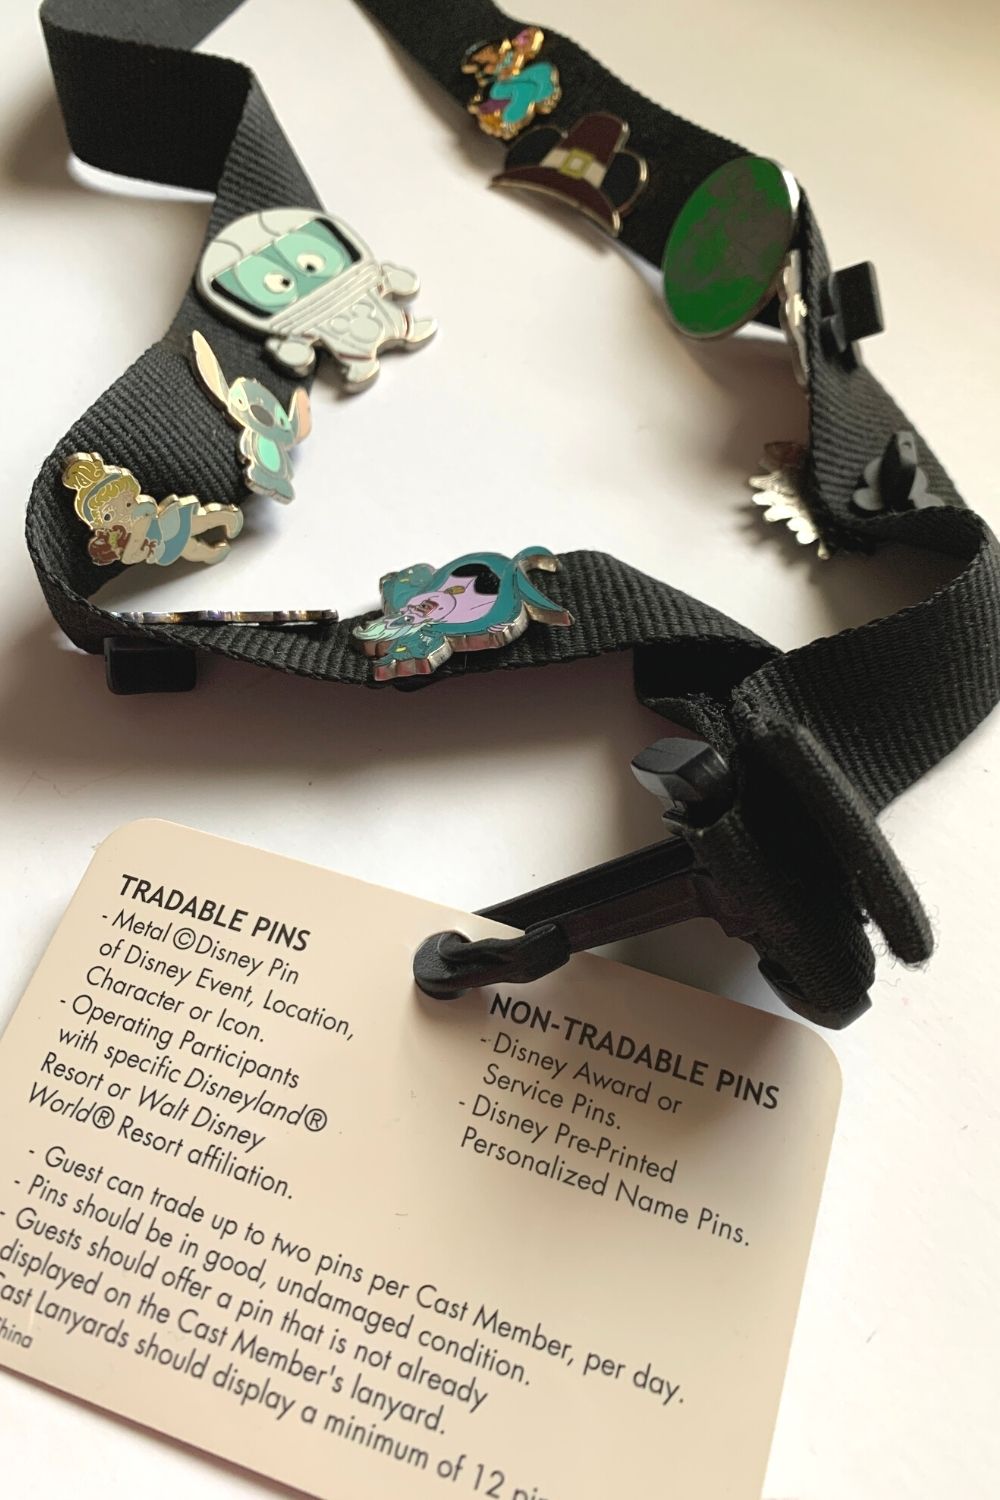 lanyard with cast member guidelines for pin trading at disney world